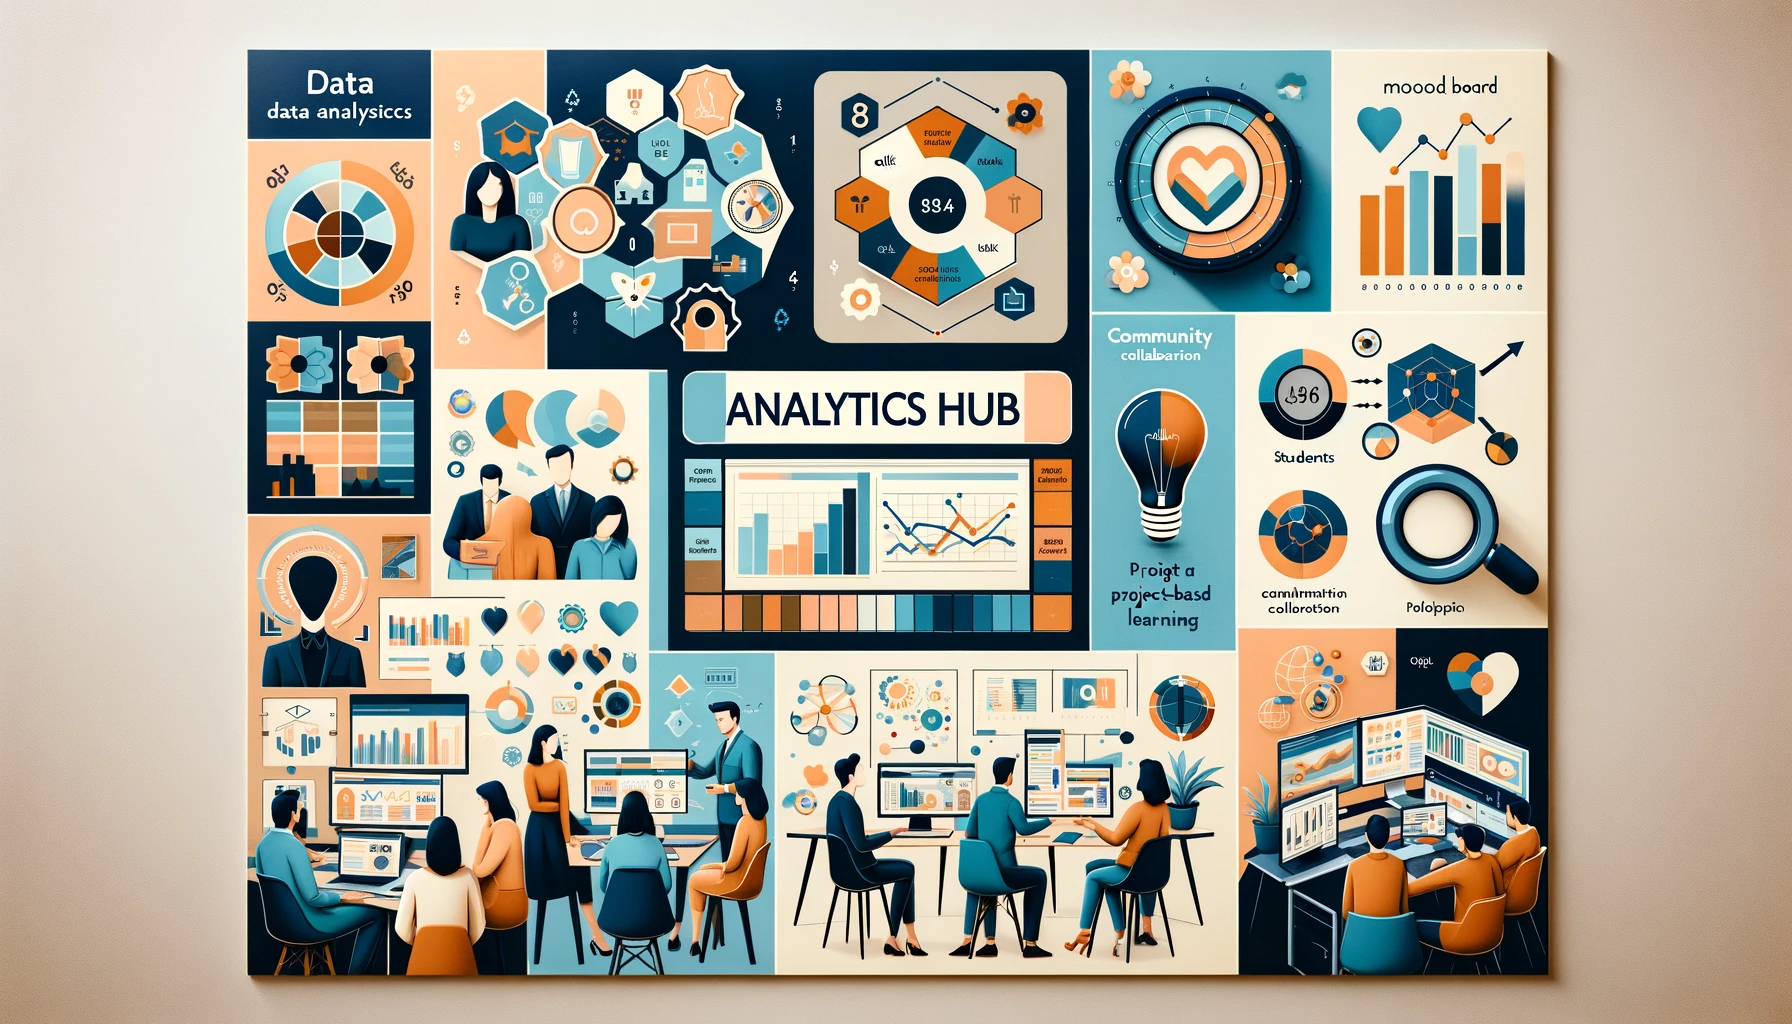 The mood board inspired by Analytics Hub has been created, visually encapsulating the essence of data analytics, interactive learning, and community collaboration. It reflects a professional and tech-savvy atmosphere, ideal for those dedicated to mastering Qlik development through project-based learning.